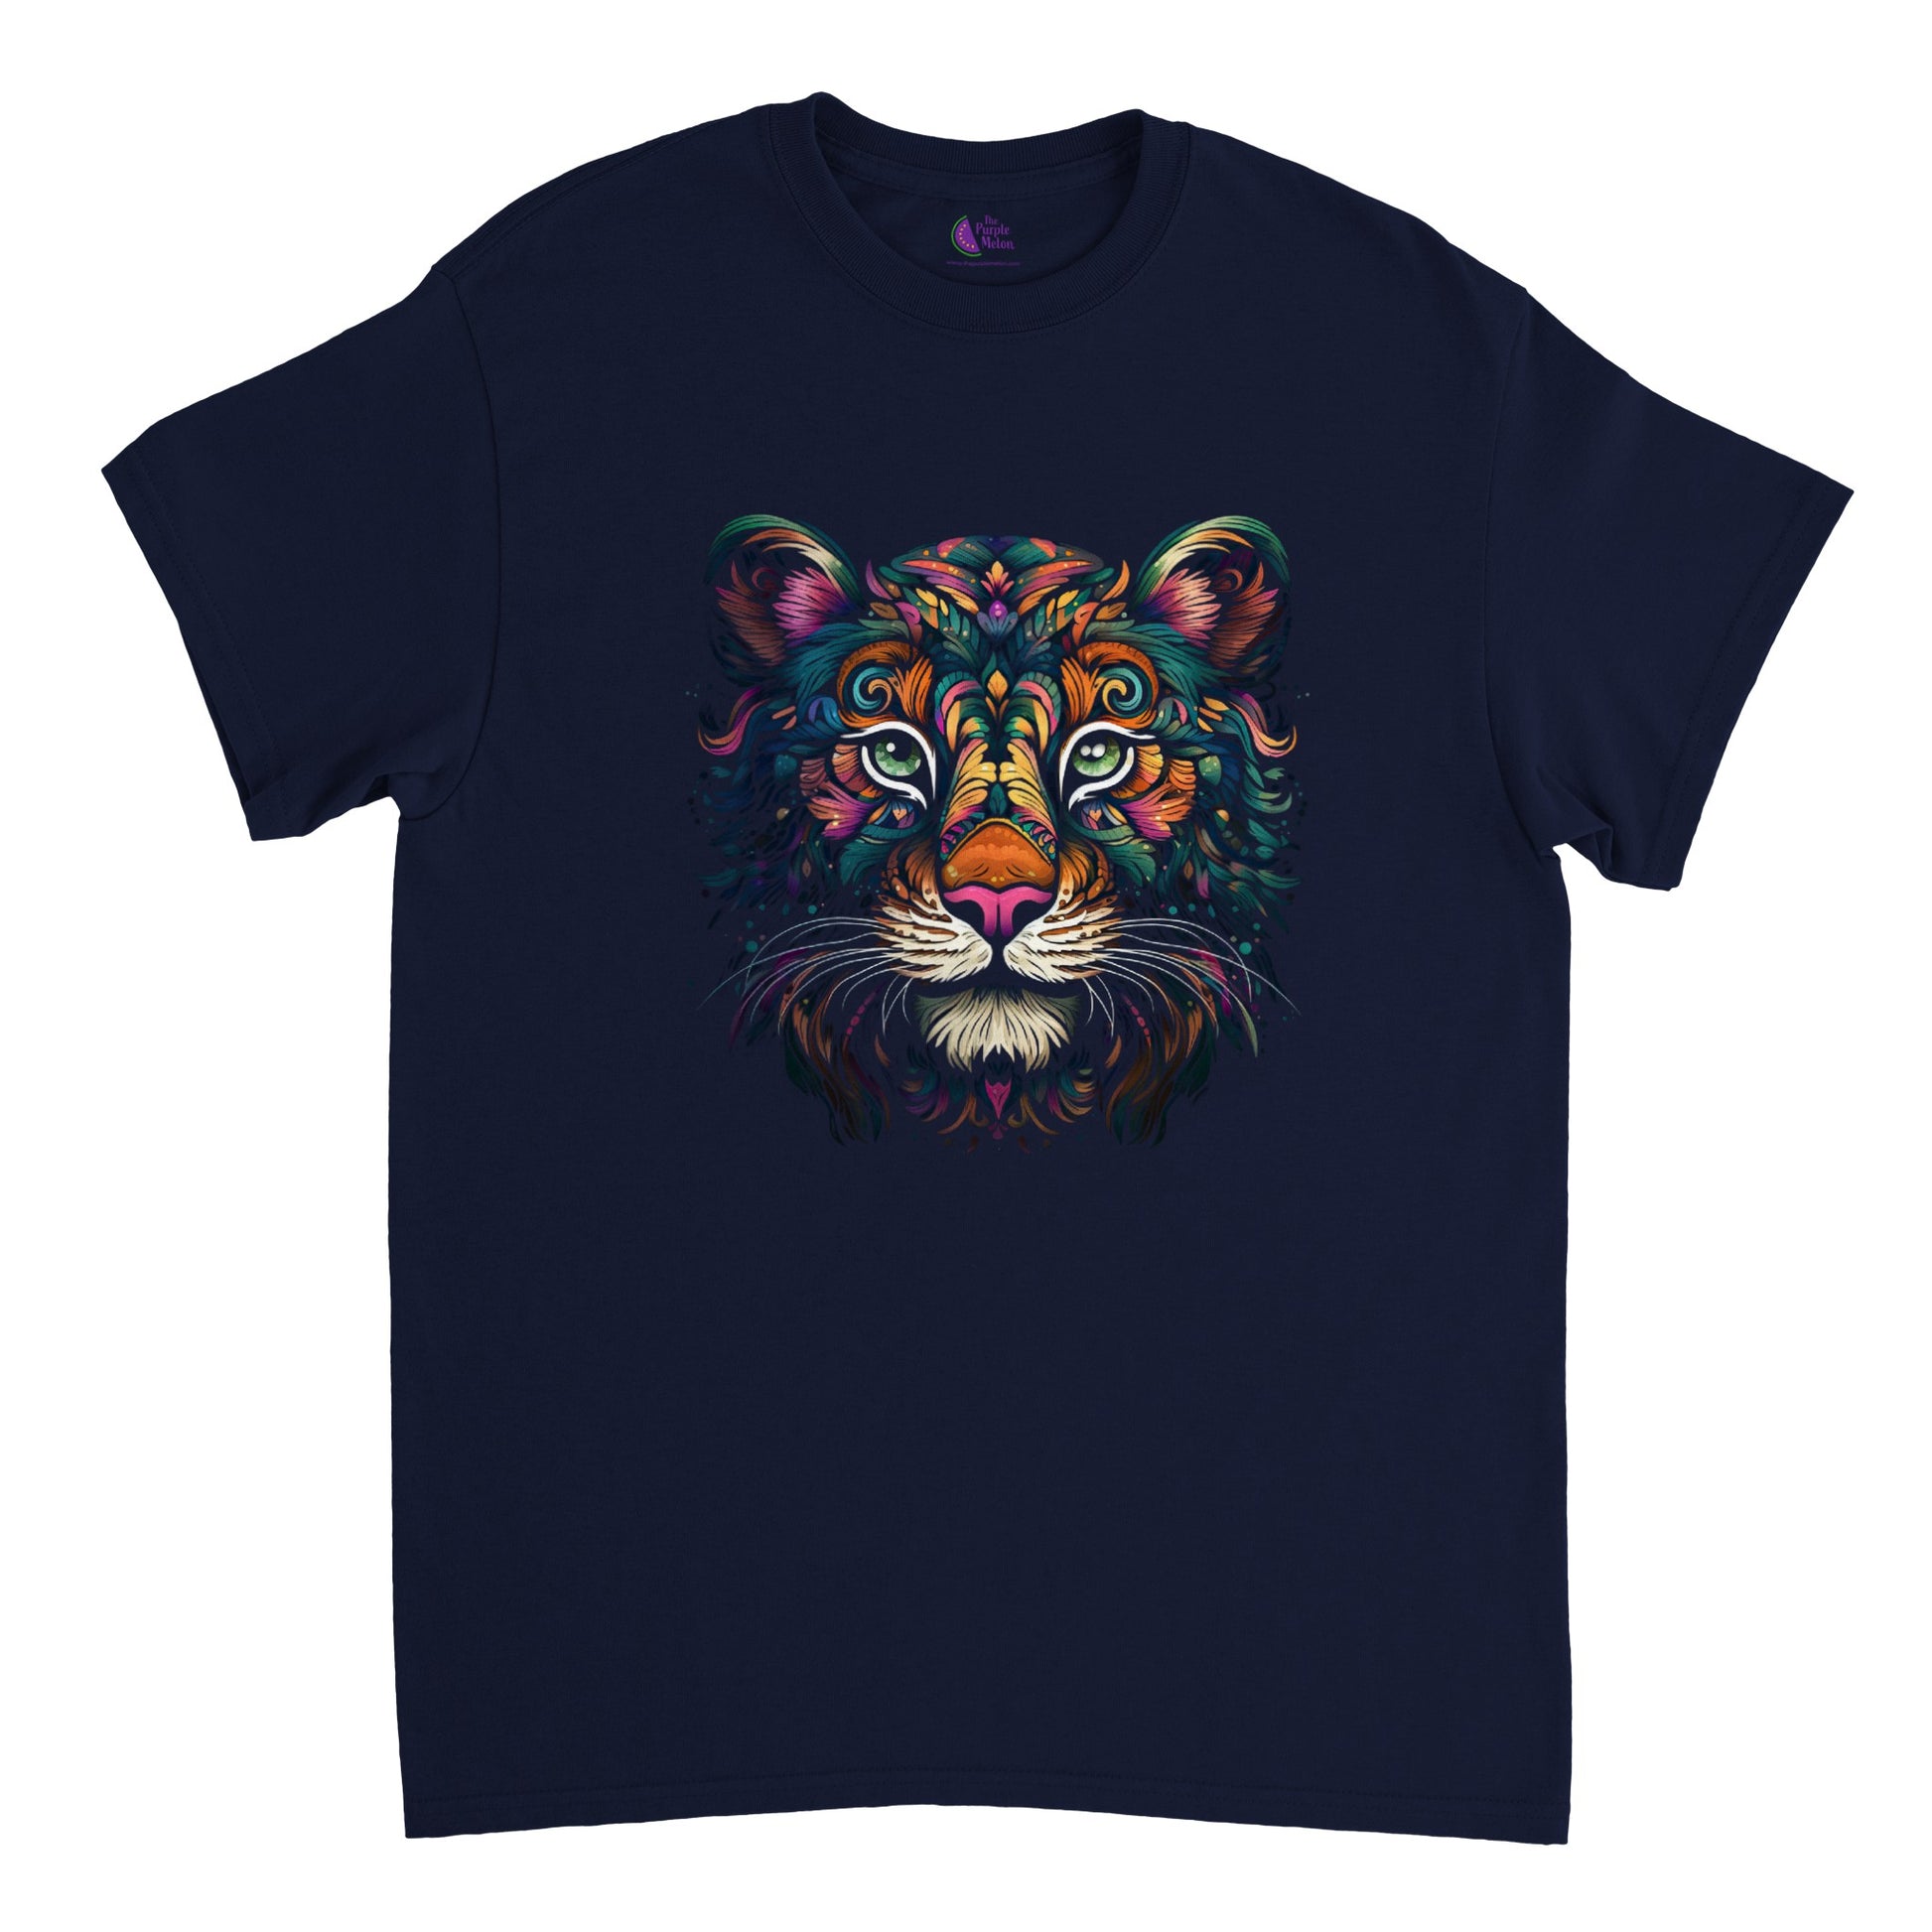 Navy blue t-shirt with a colorful floral tiger print